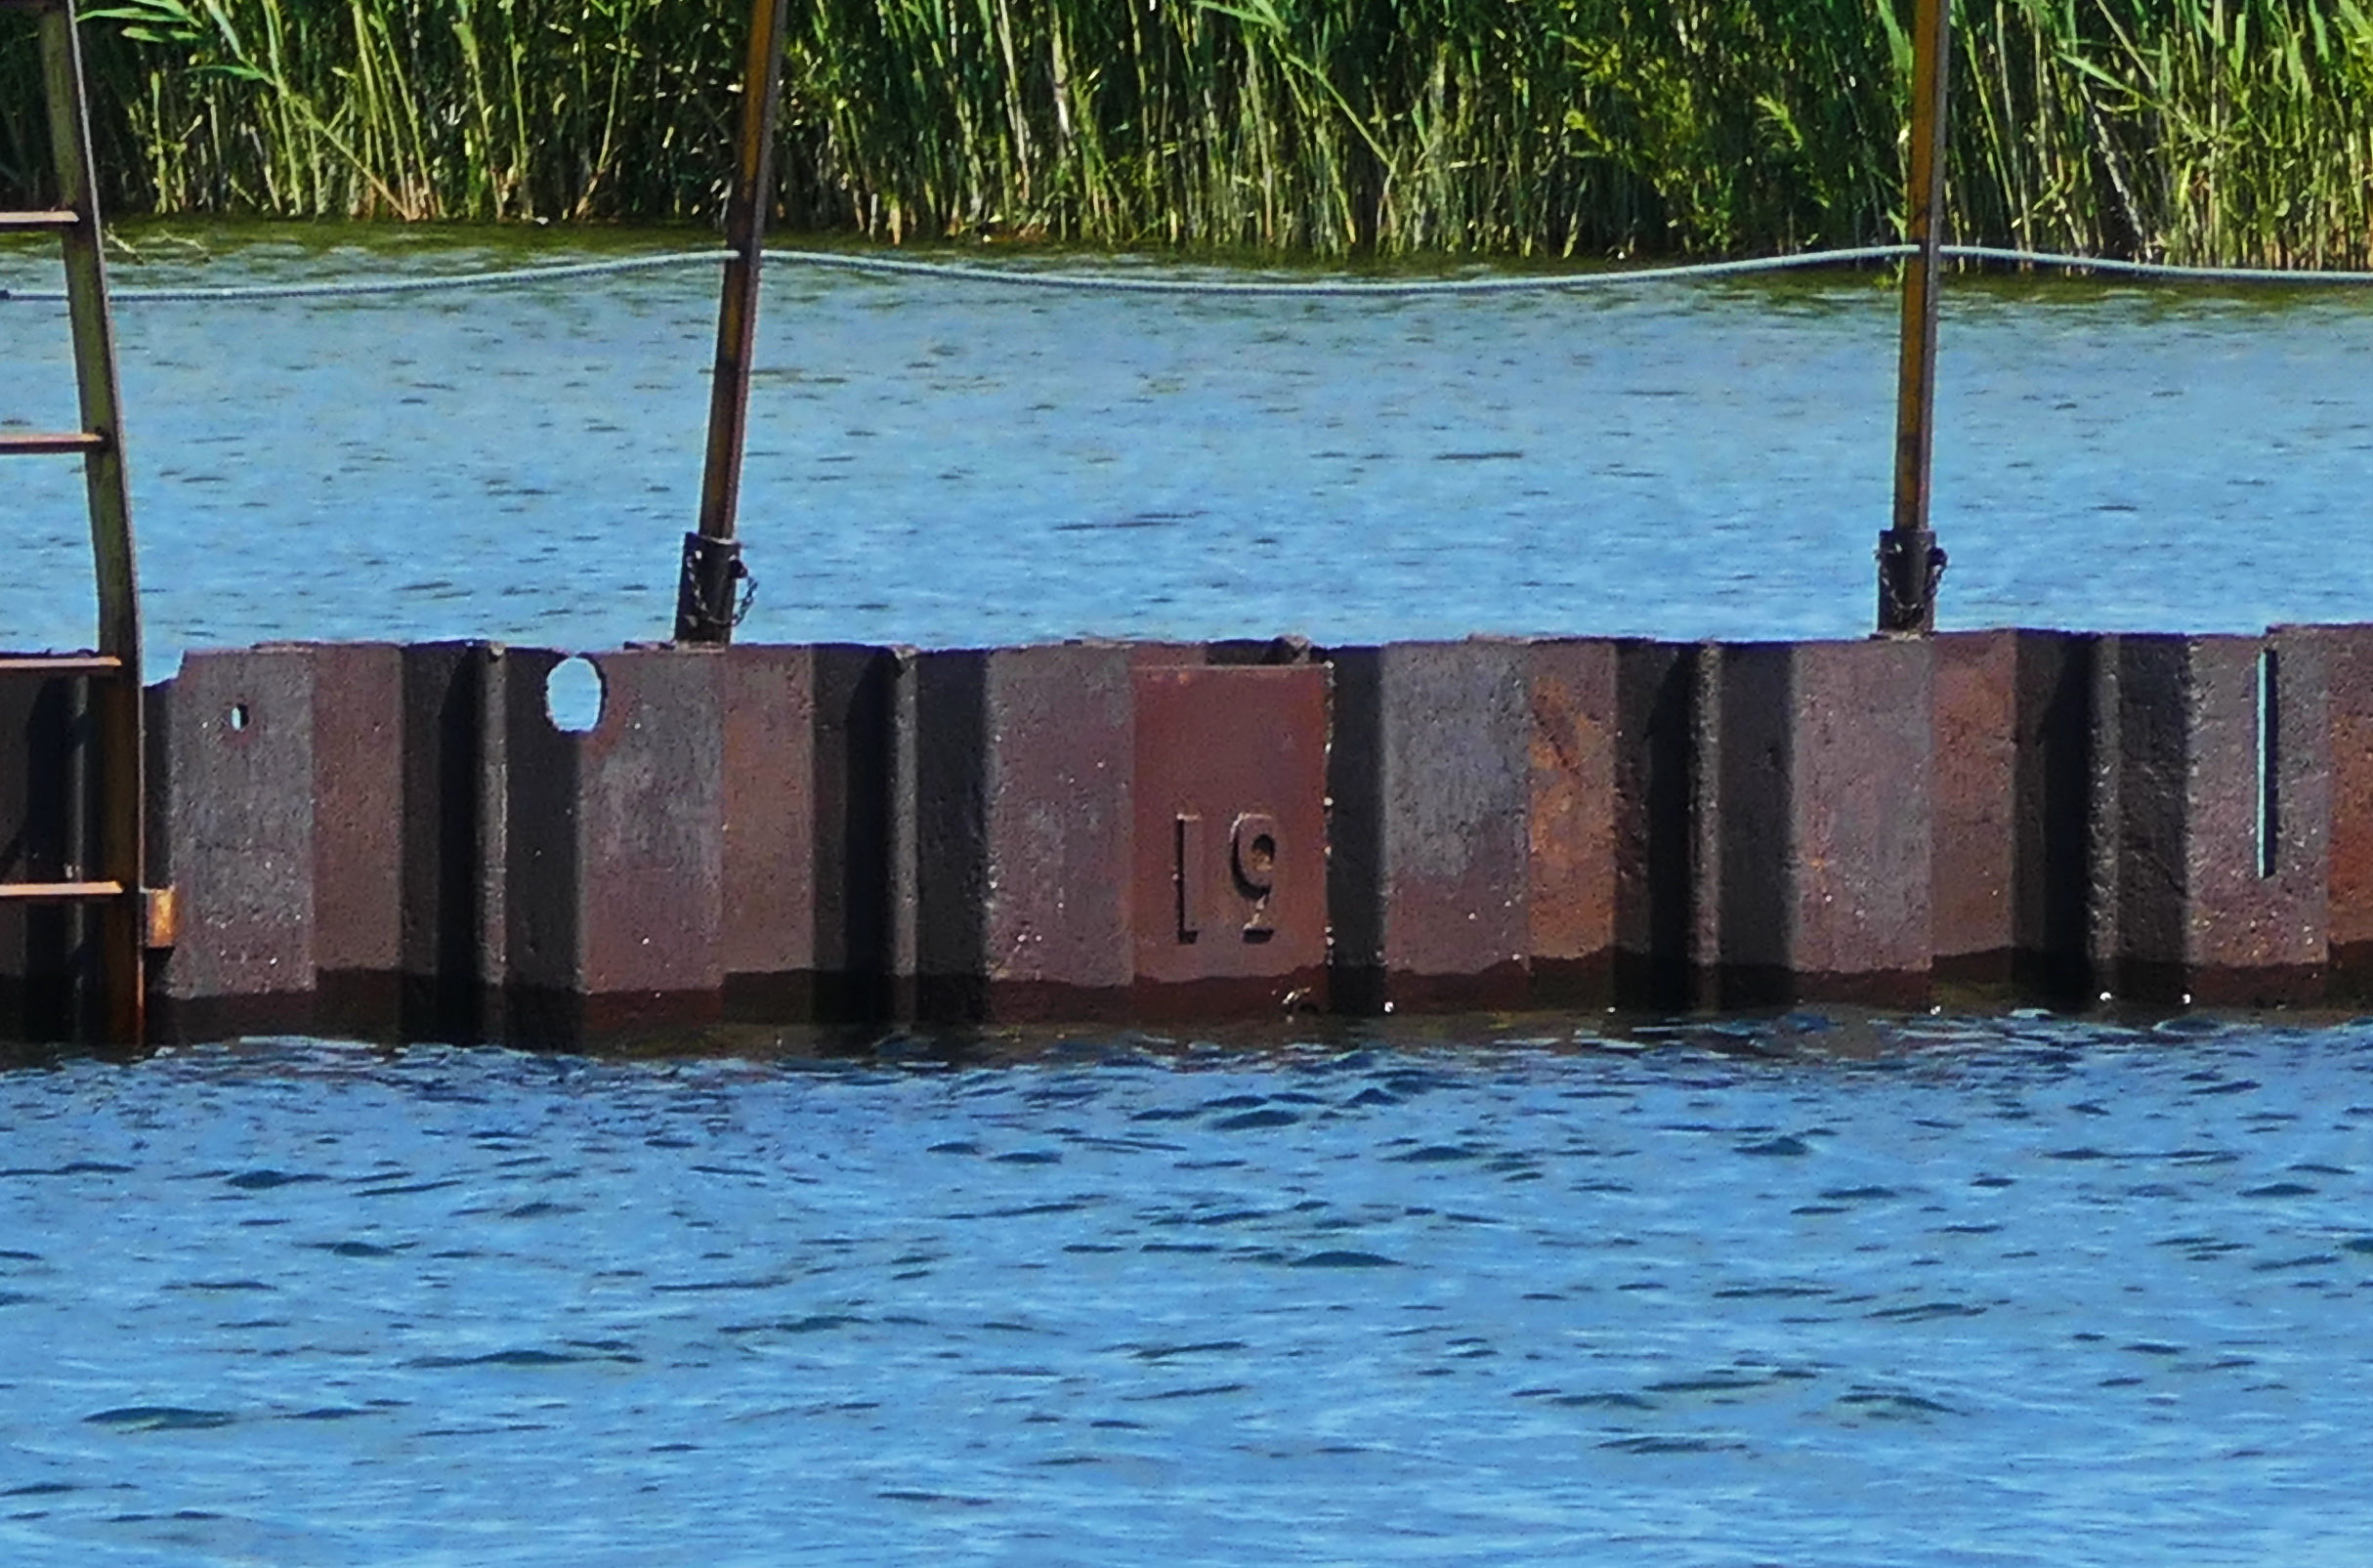 Collingwood Side Launch Basin July, 9 2018 (4 feet higher than Sept 29, 2012)